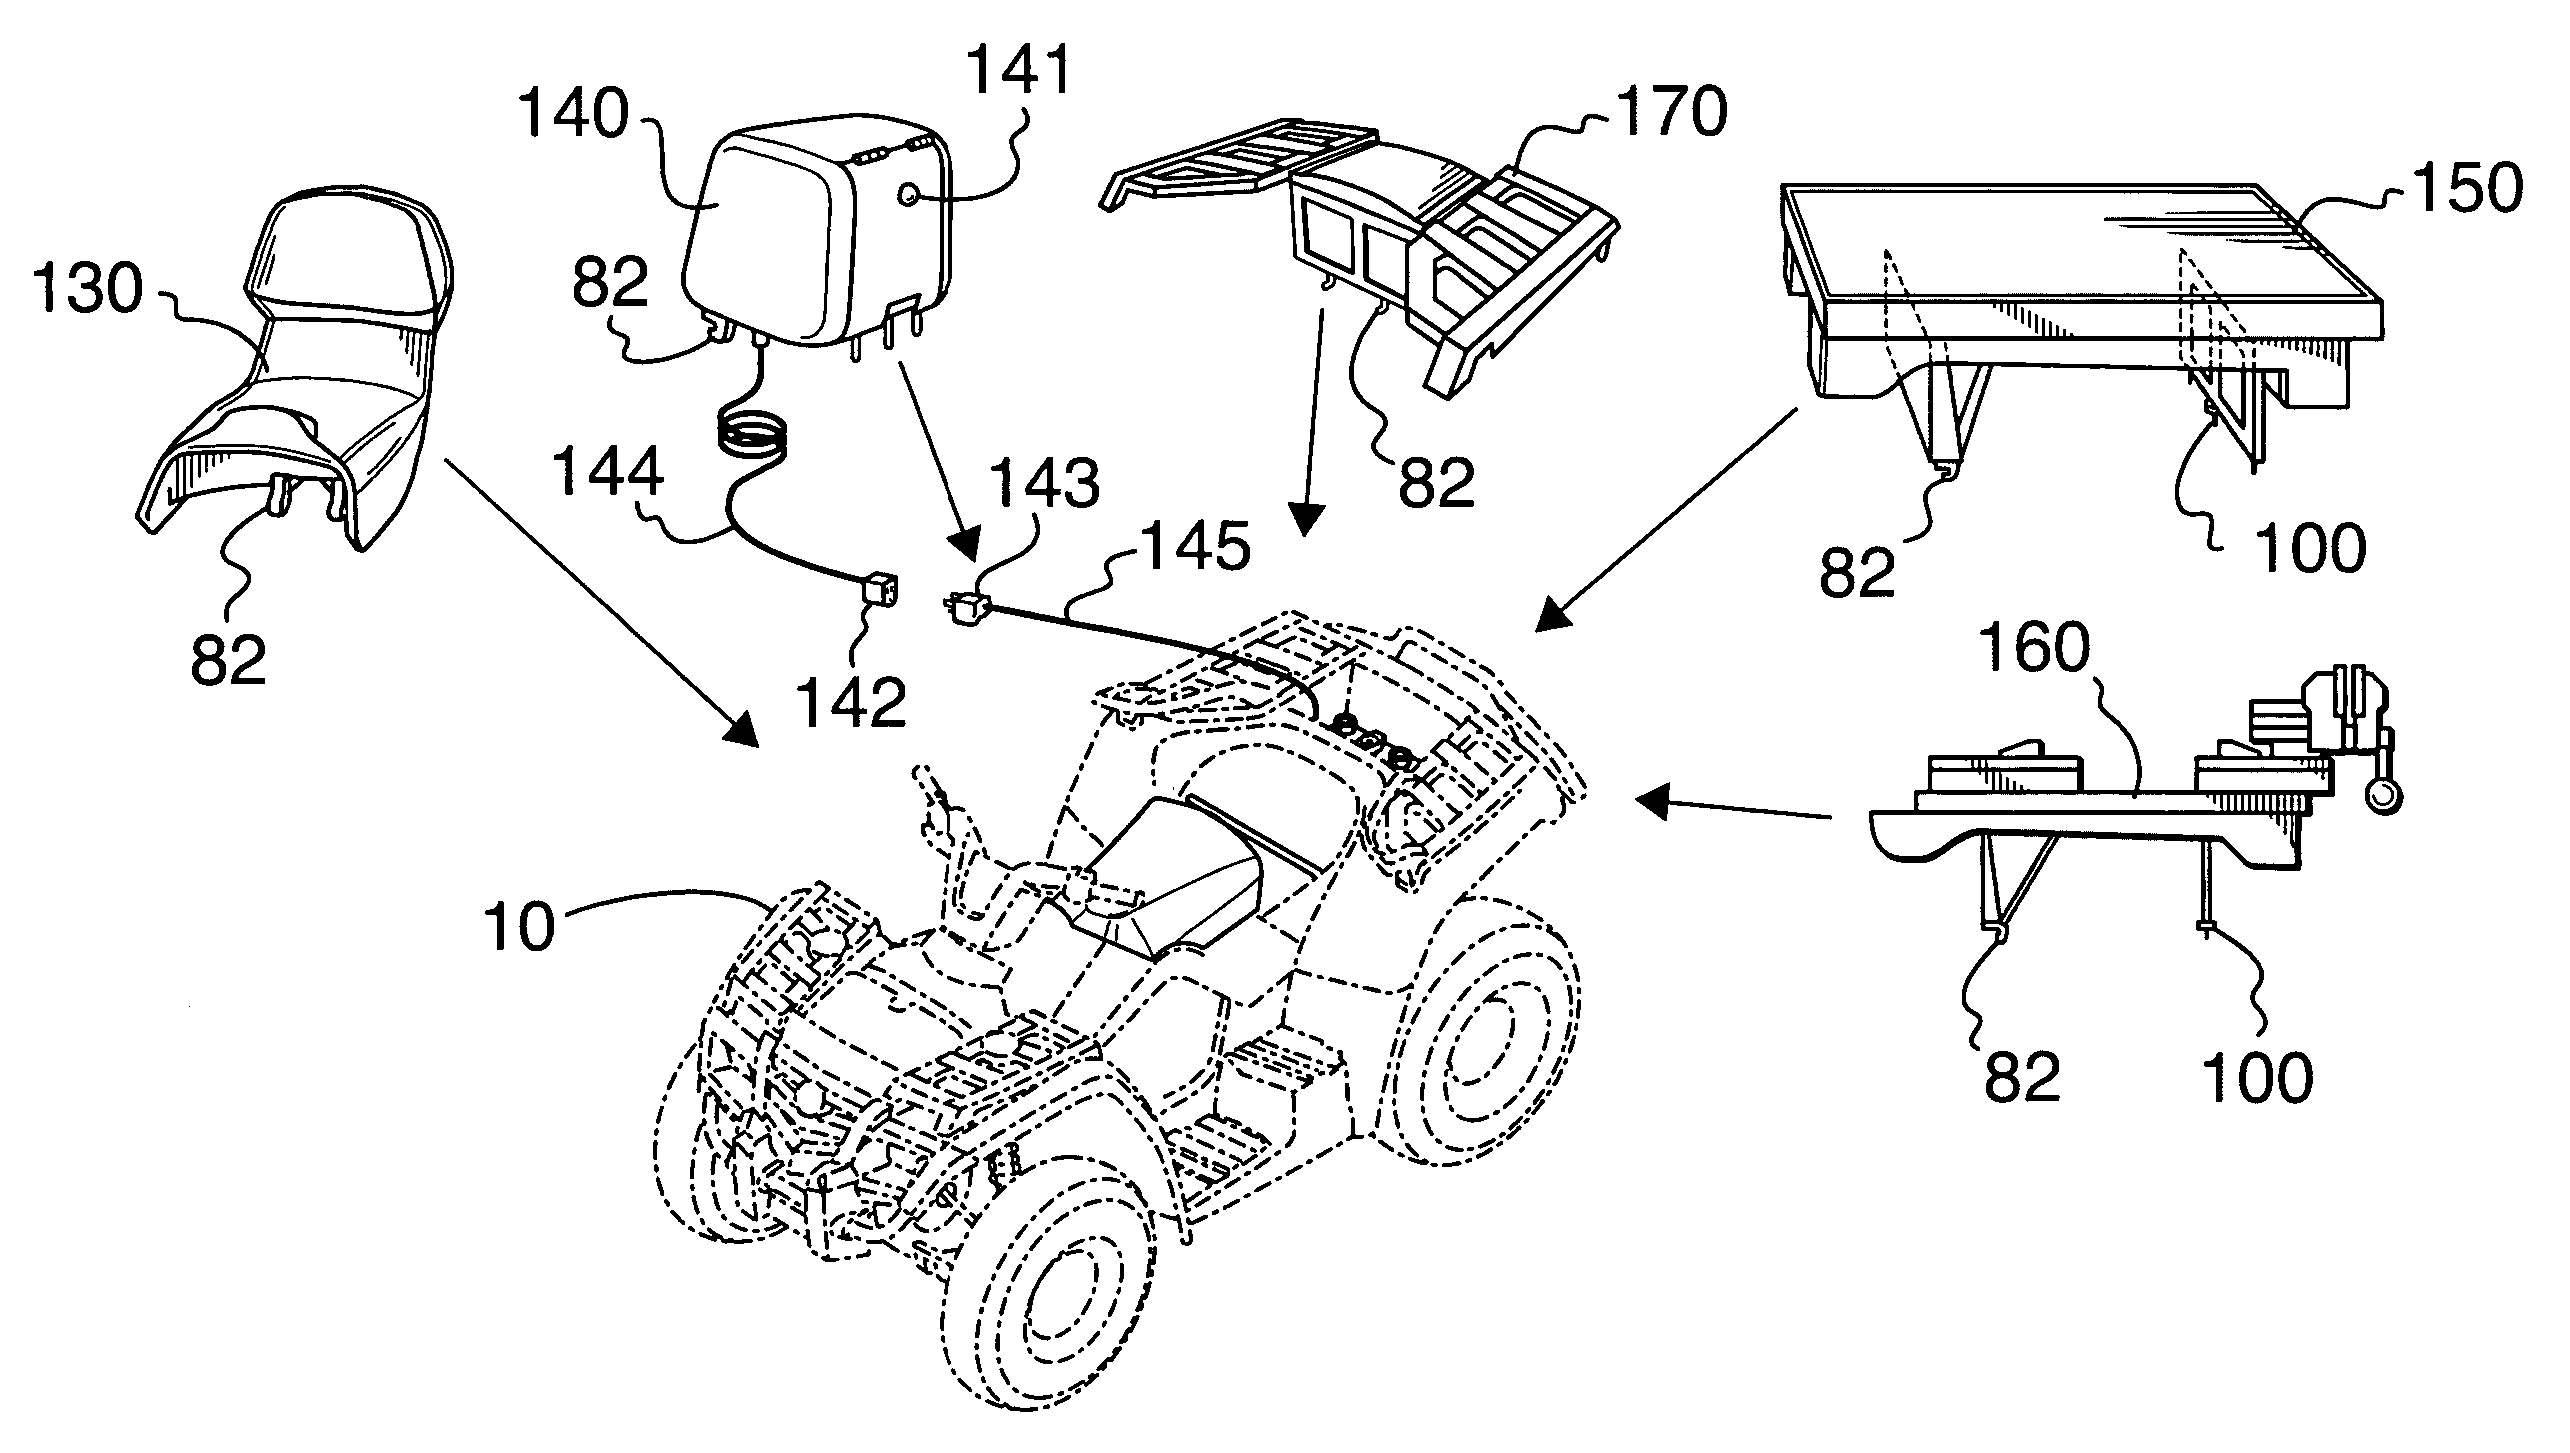 Modular components for an all-terrain vehicle